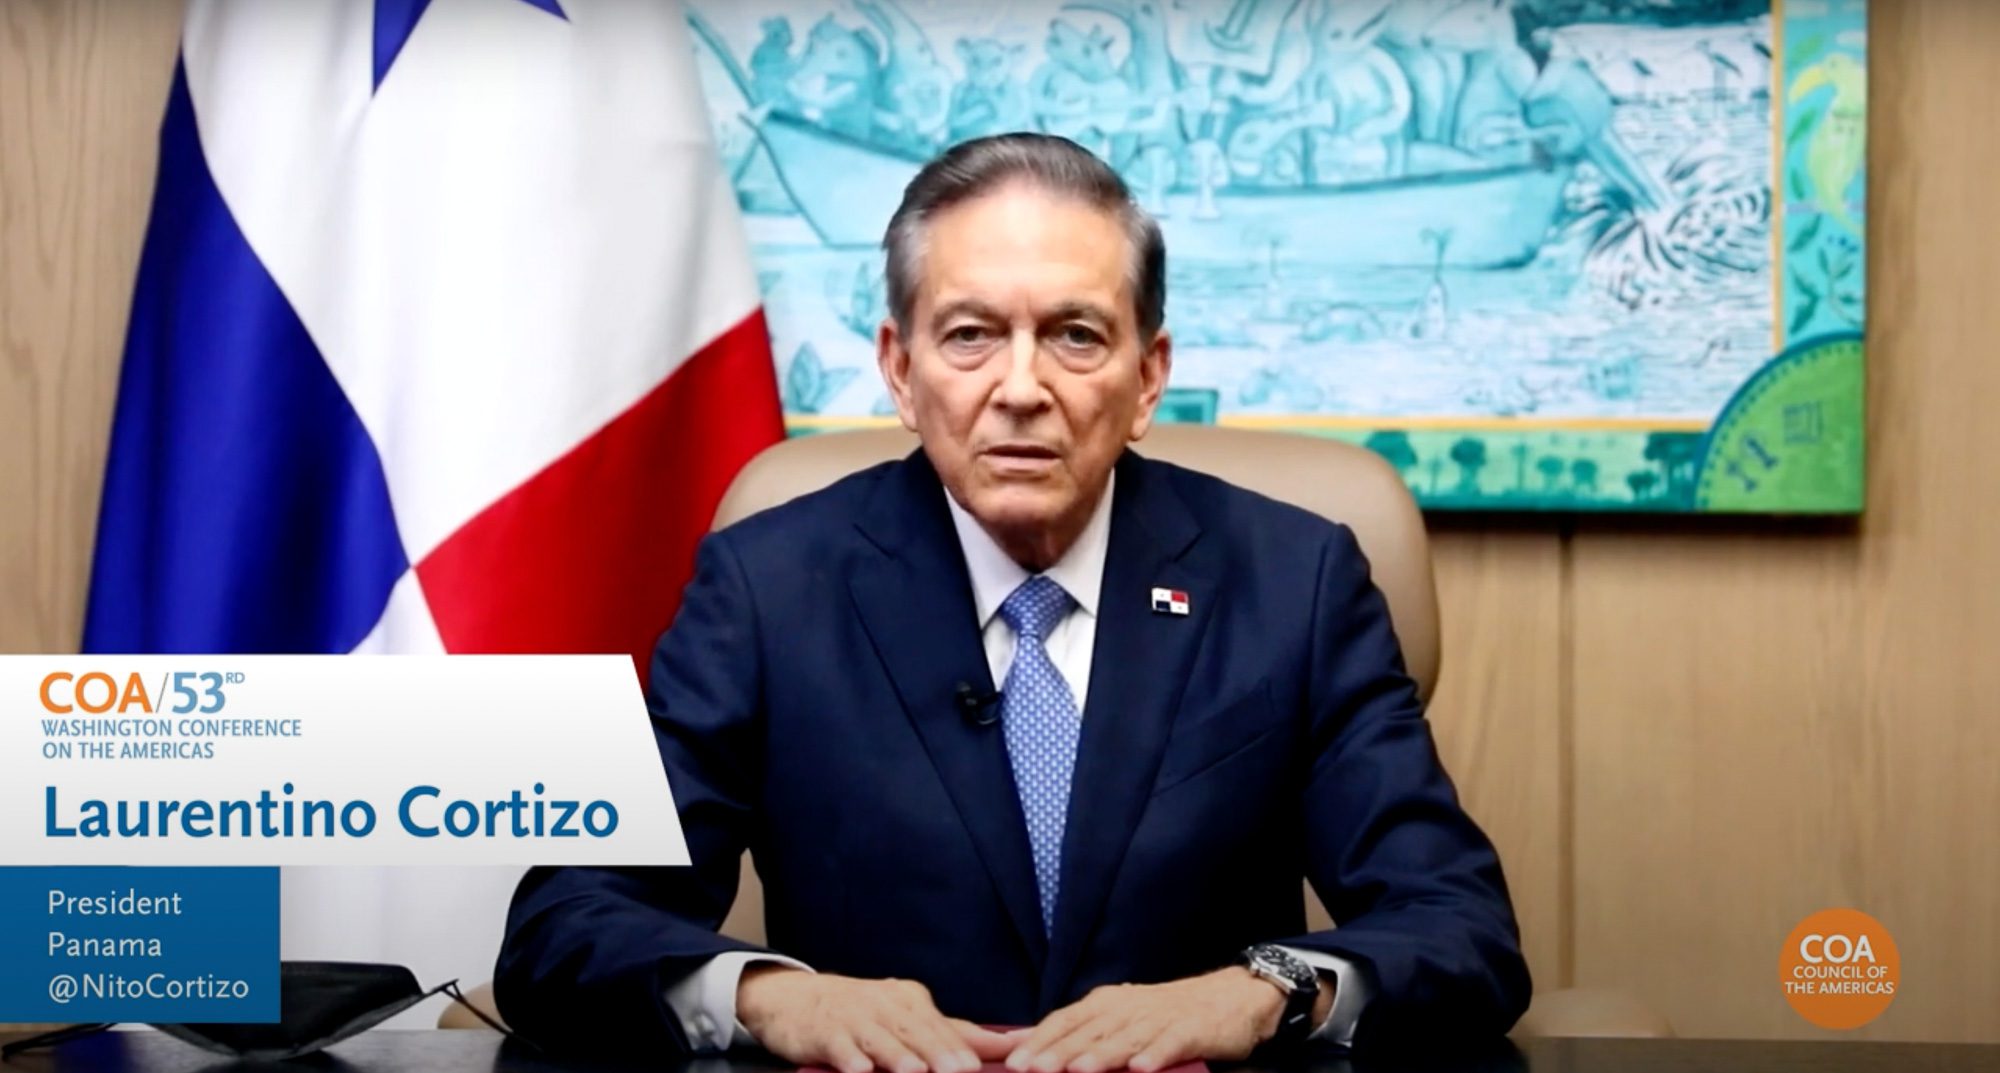 Panama’s President, Laurentino Cortizo Cohen Highlights Fast-Growing Economy and Connectivity at 2023 Washington Conference on the Americas